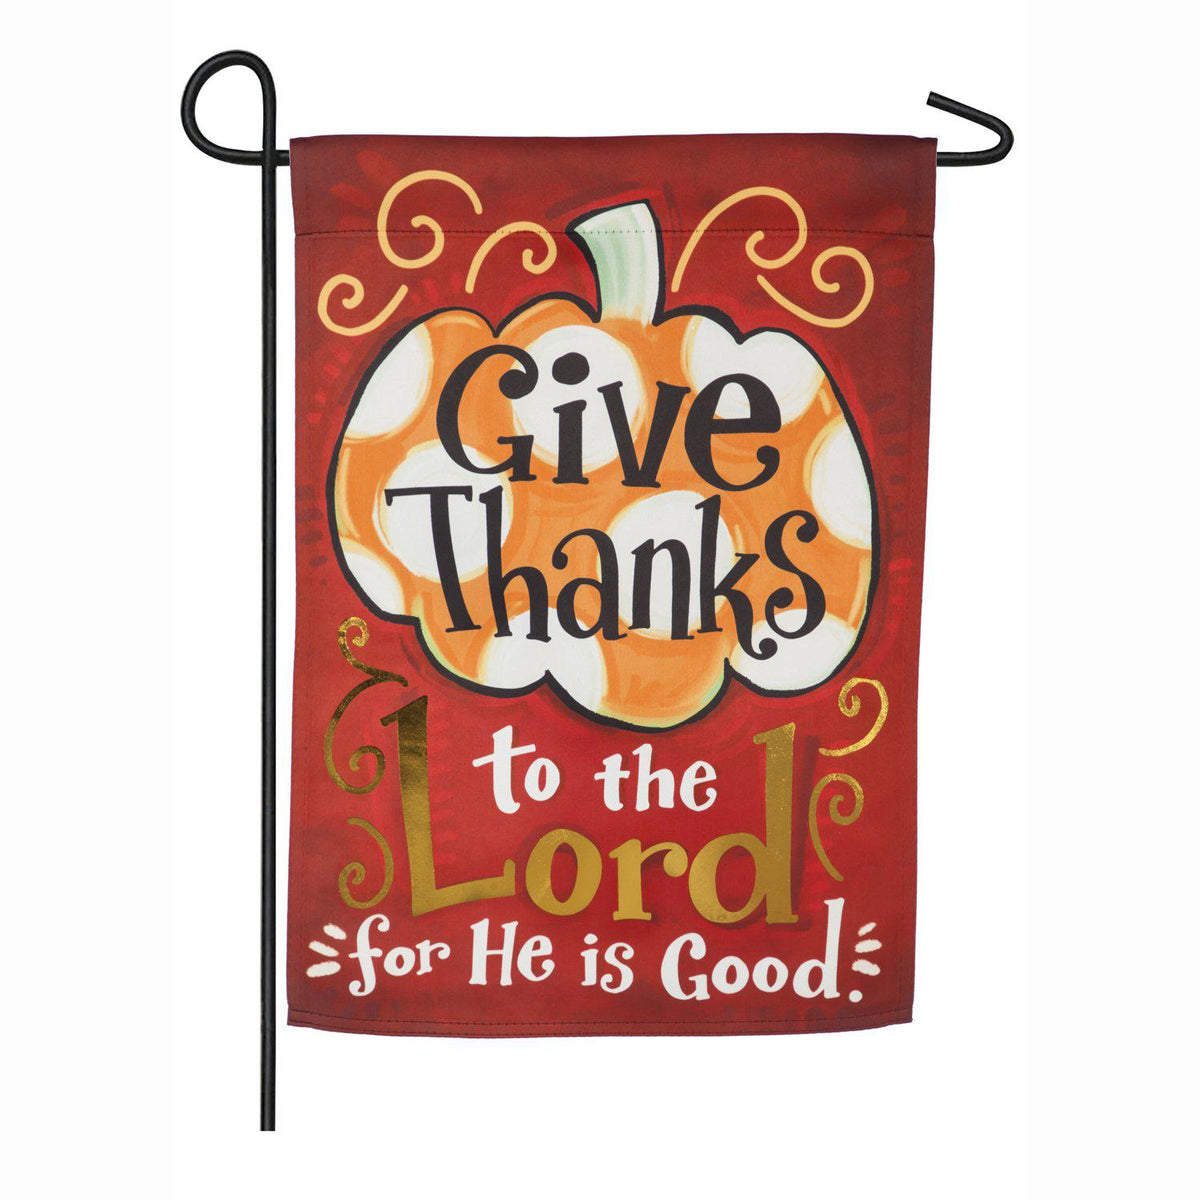 The Give Thanks to the Lord garden flag features a spotted pumpkin on an orange background and the words "Give Thanks to the Lorde for He is Good". 